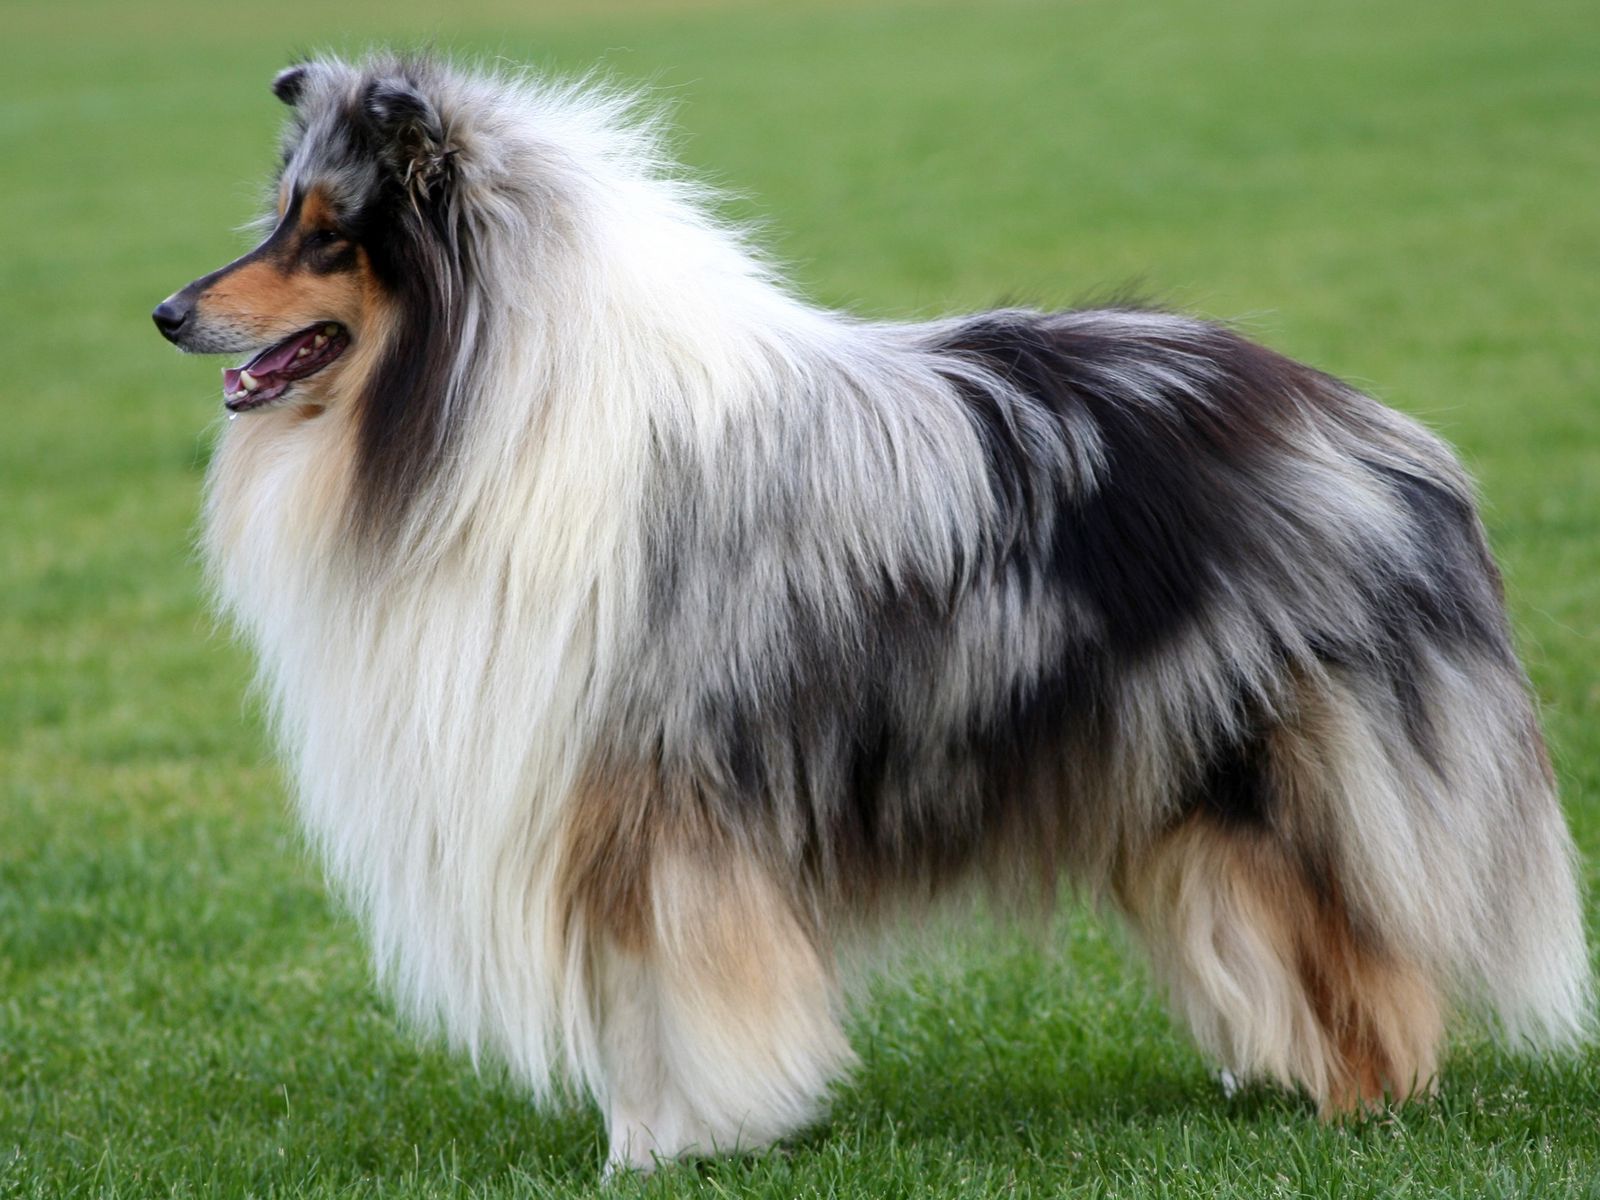 The importance of caring for long-haired dog breeds